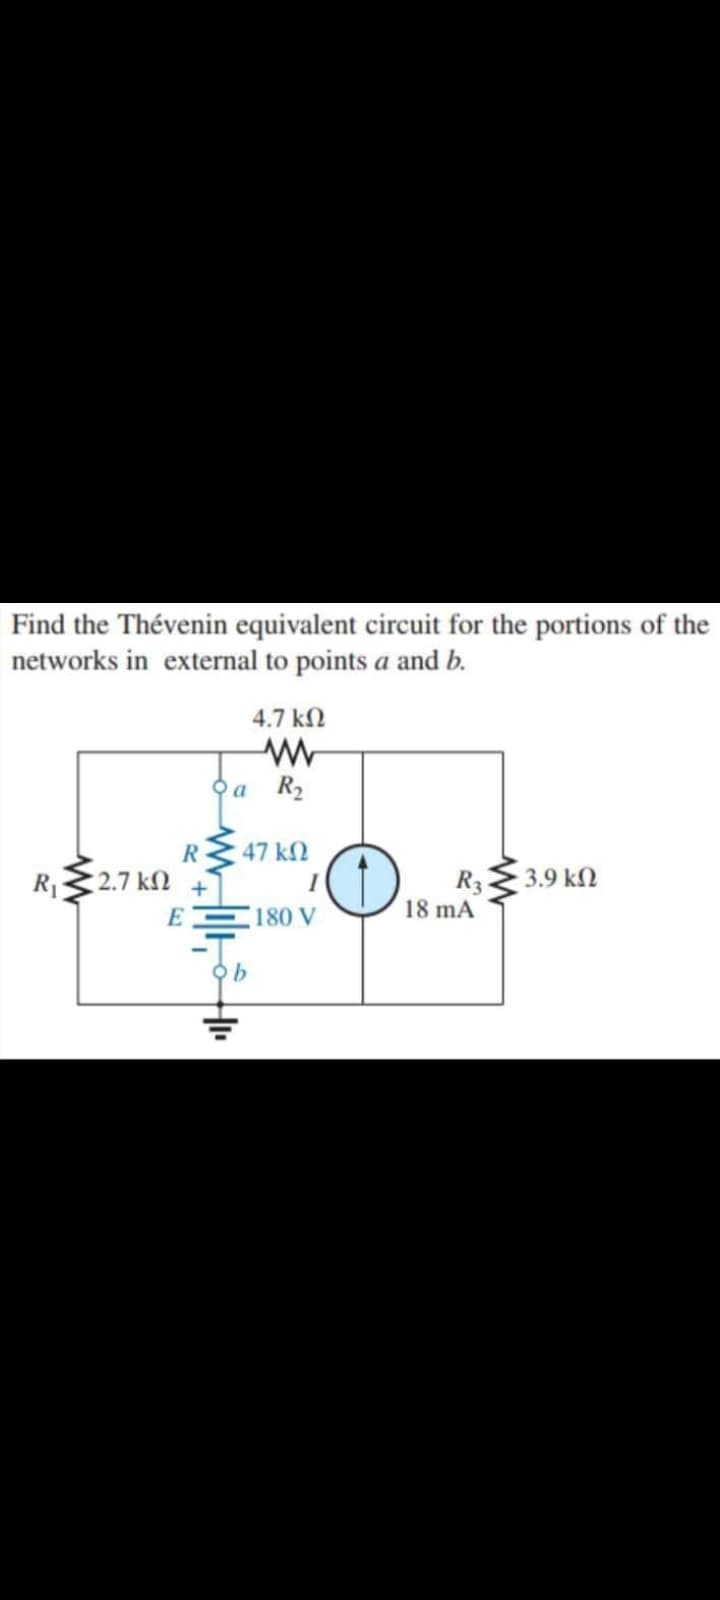 Find the Thévenin equivalent circuit for the portions of the
networks in external to points a and b.
4.7 k
오a R2
R 47 kN
3.9 kN
R
2.7 kN
+
R3
18 mA
E C180 V
오b
